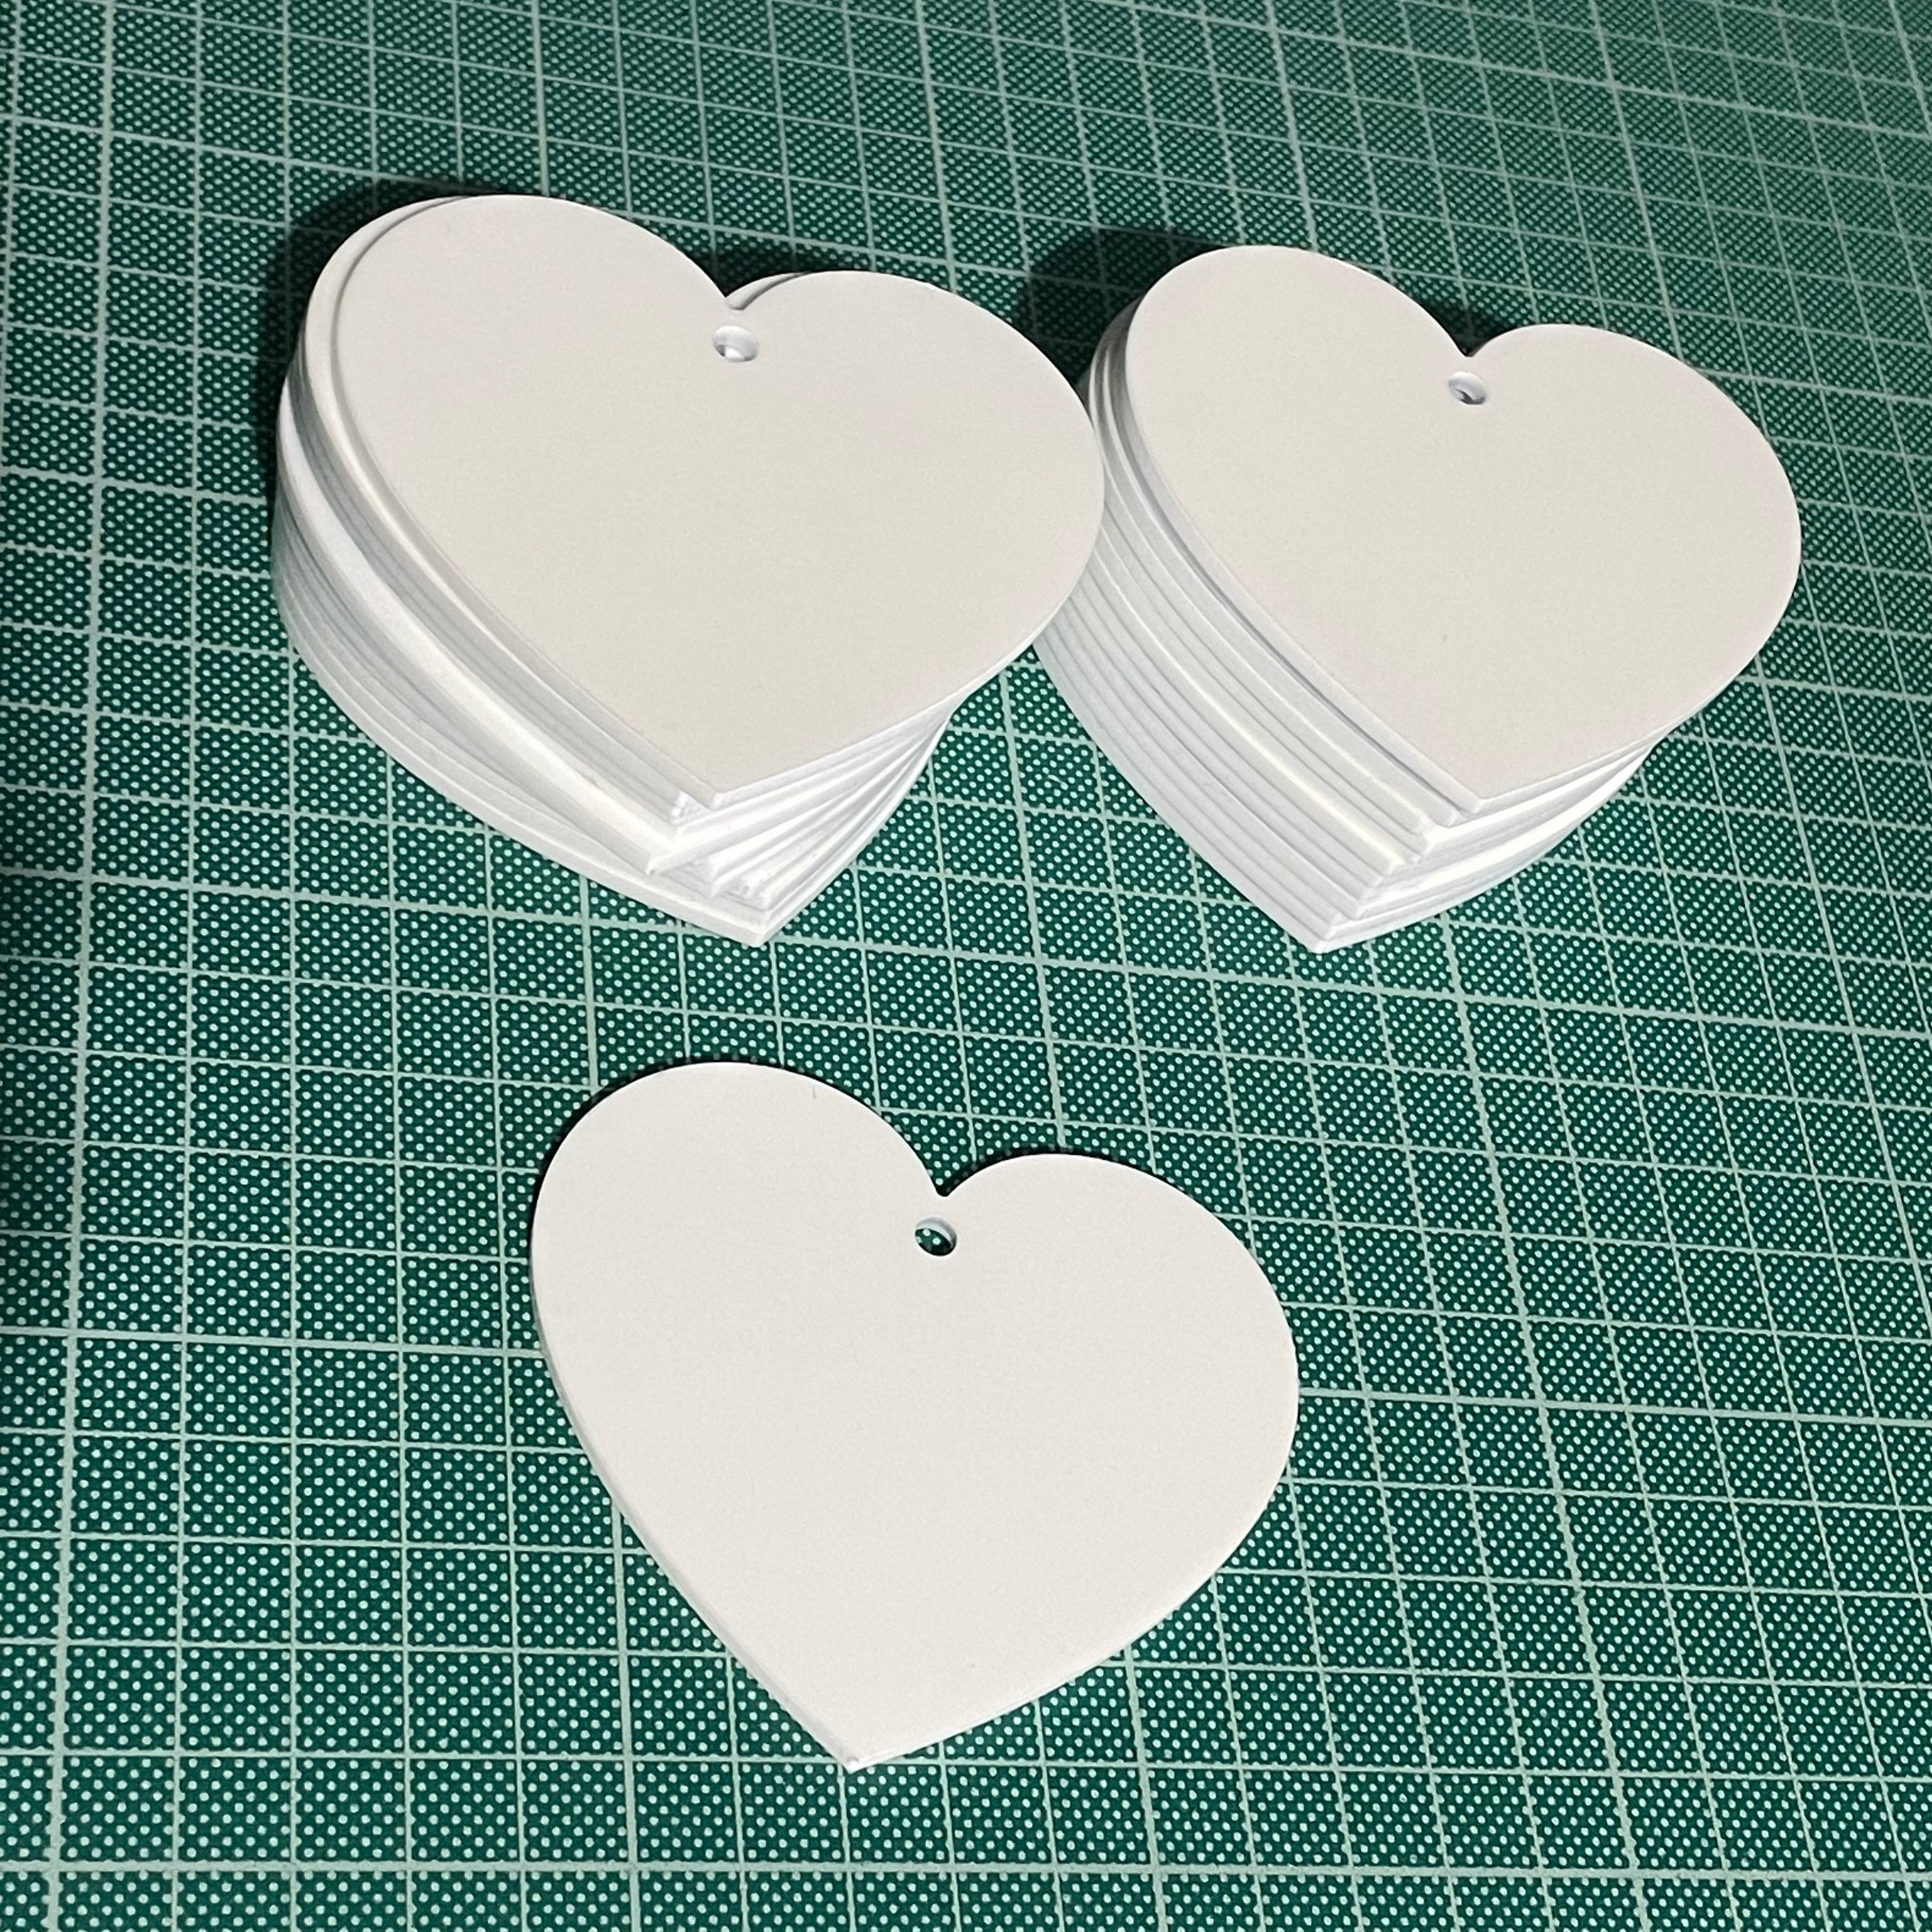 Printing Jig for 80mm Heart Blanks - A4 Flatbed Printers (6 Spaces)